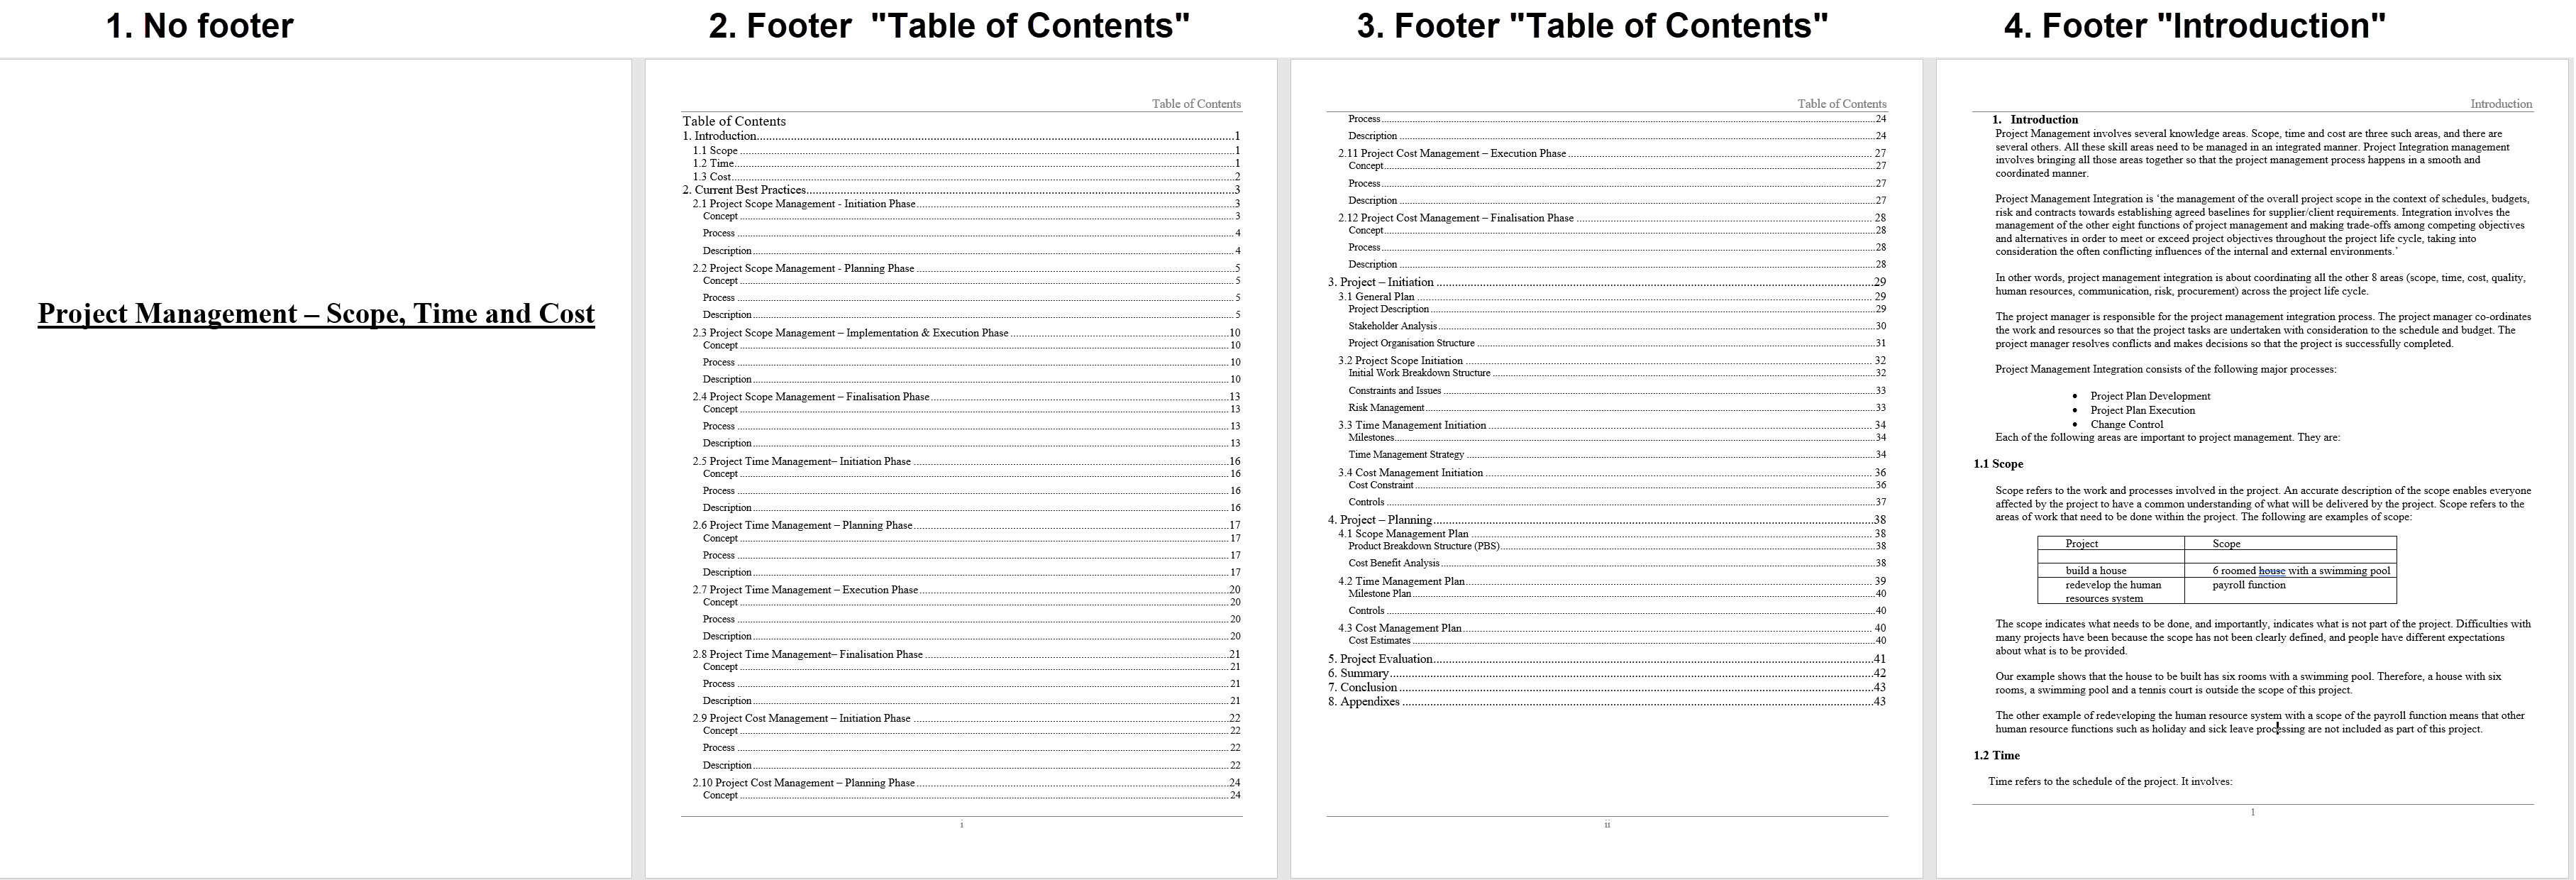 Example of different footers (1) No footer in title page (2) Footer with page numbers in Roman numeral format in "Table of Contents" (3) Footer with Arabic page numbers in Introduction